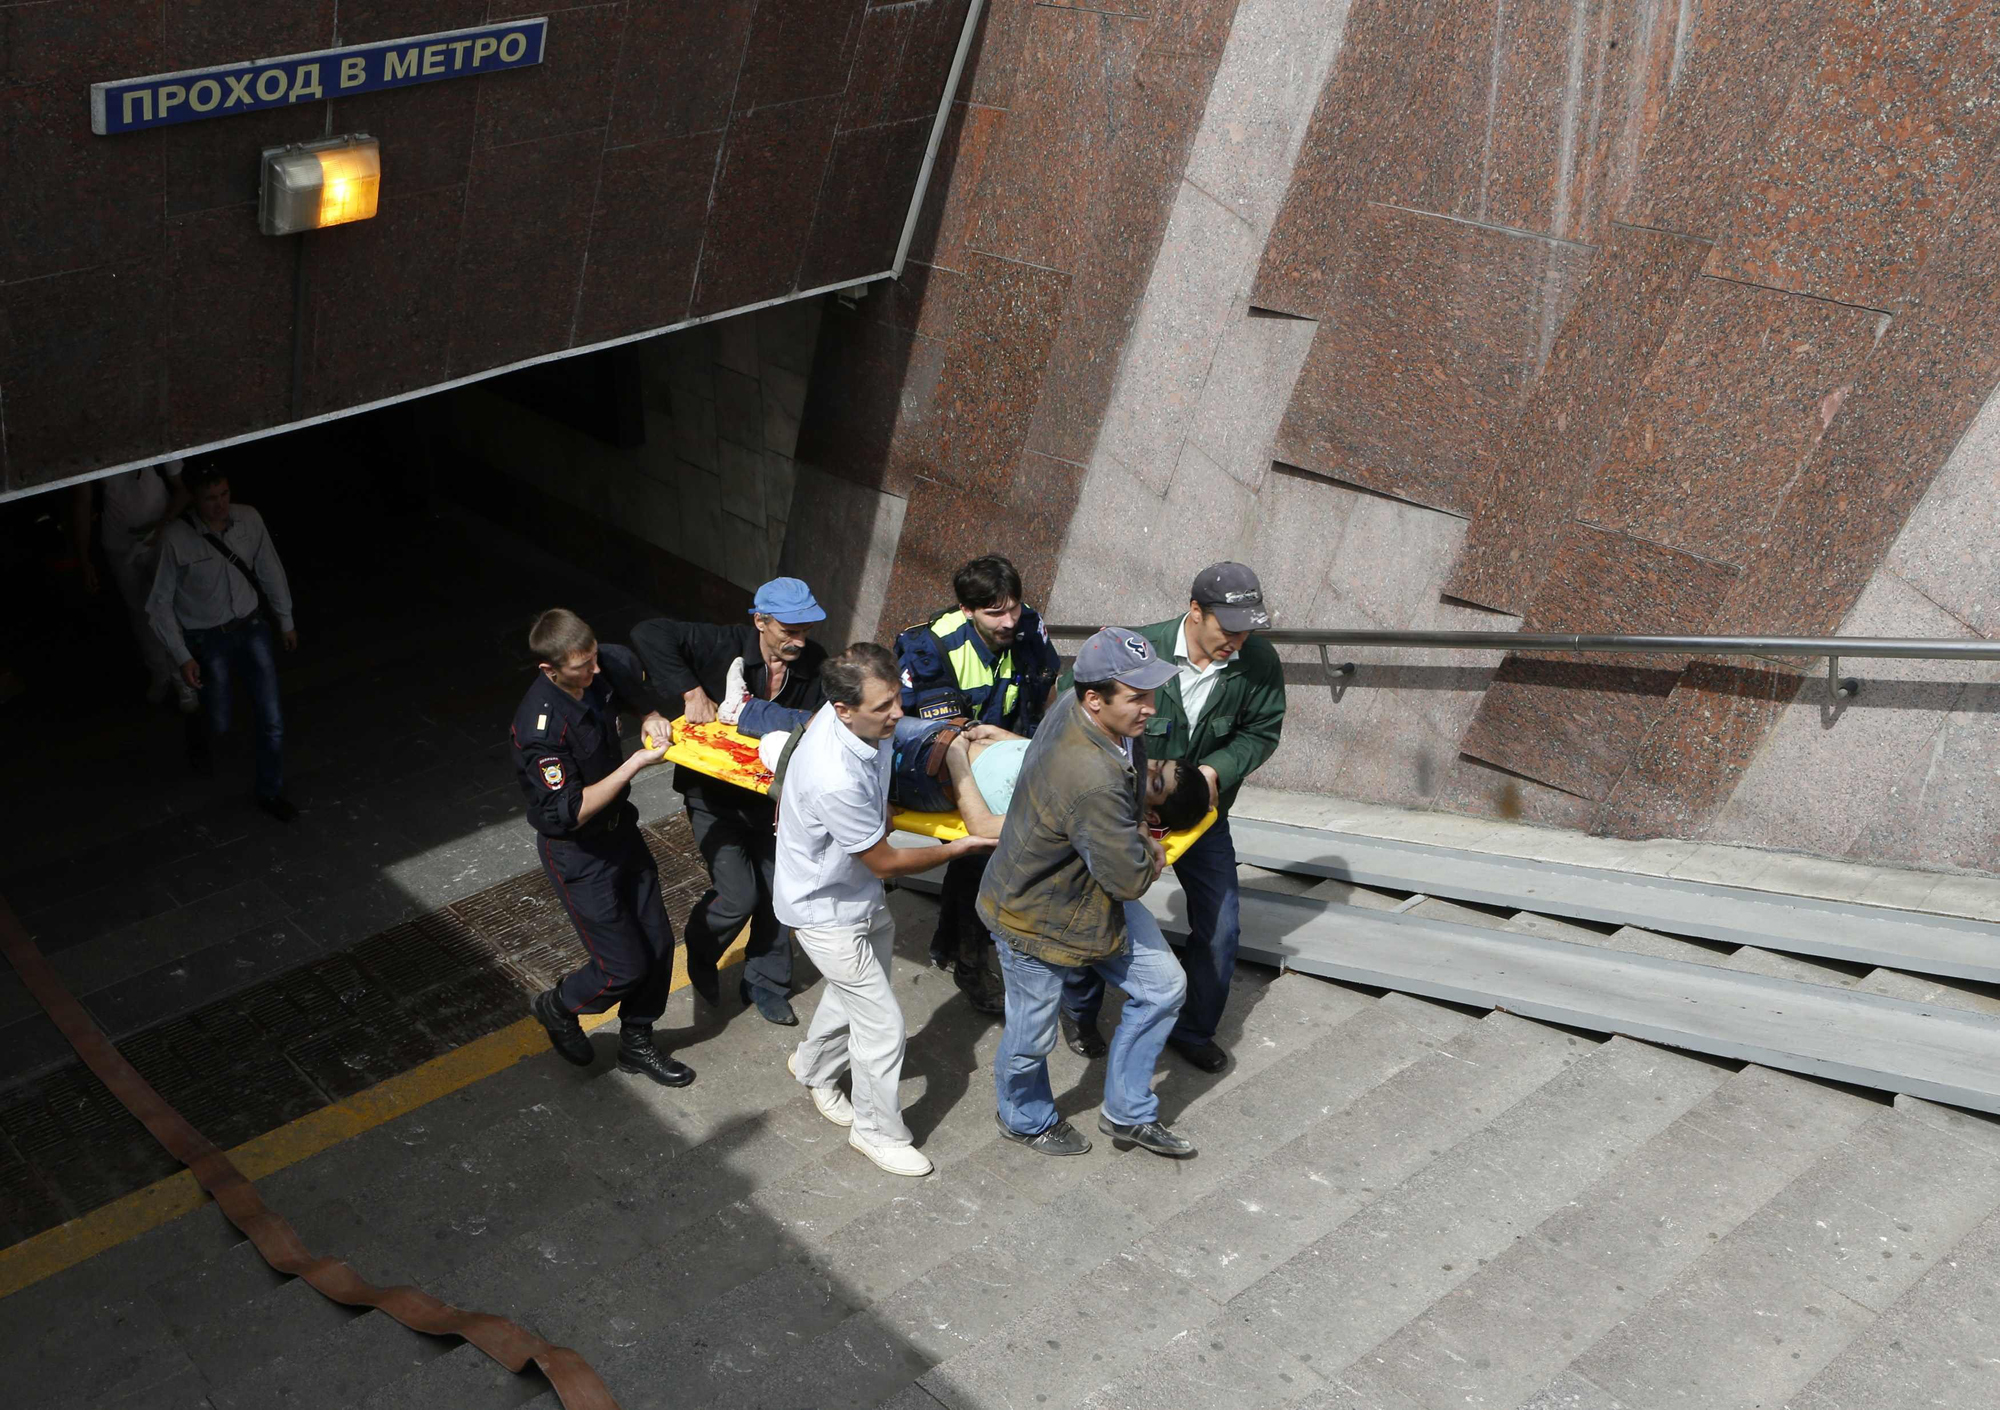 Members of the emergency services carry an injured passenger outside a metro station following an accident on the subway in Moscow July 15, 2014.